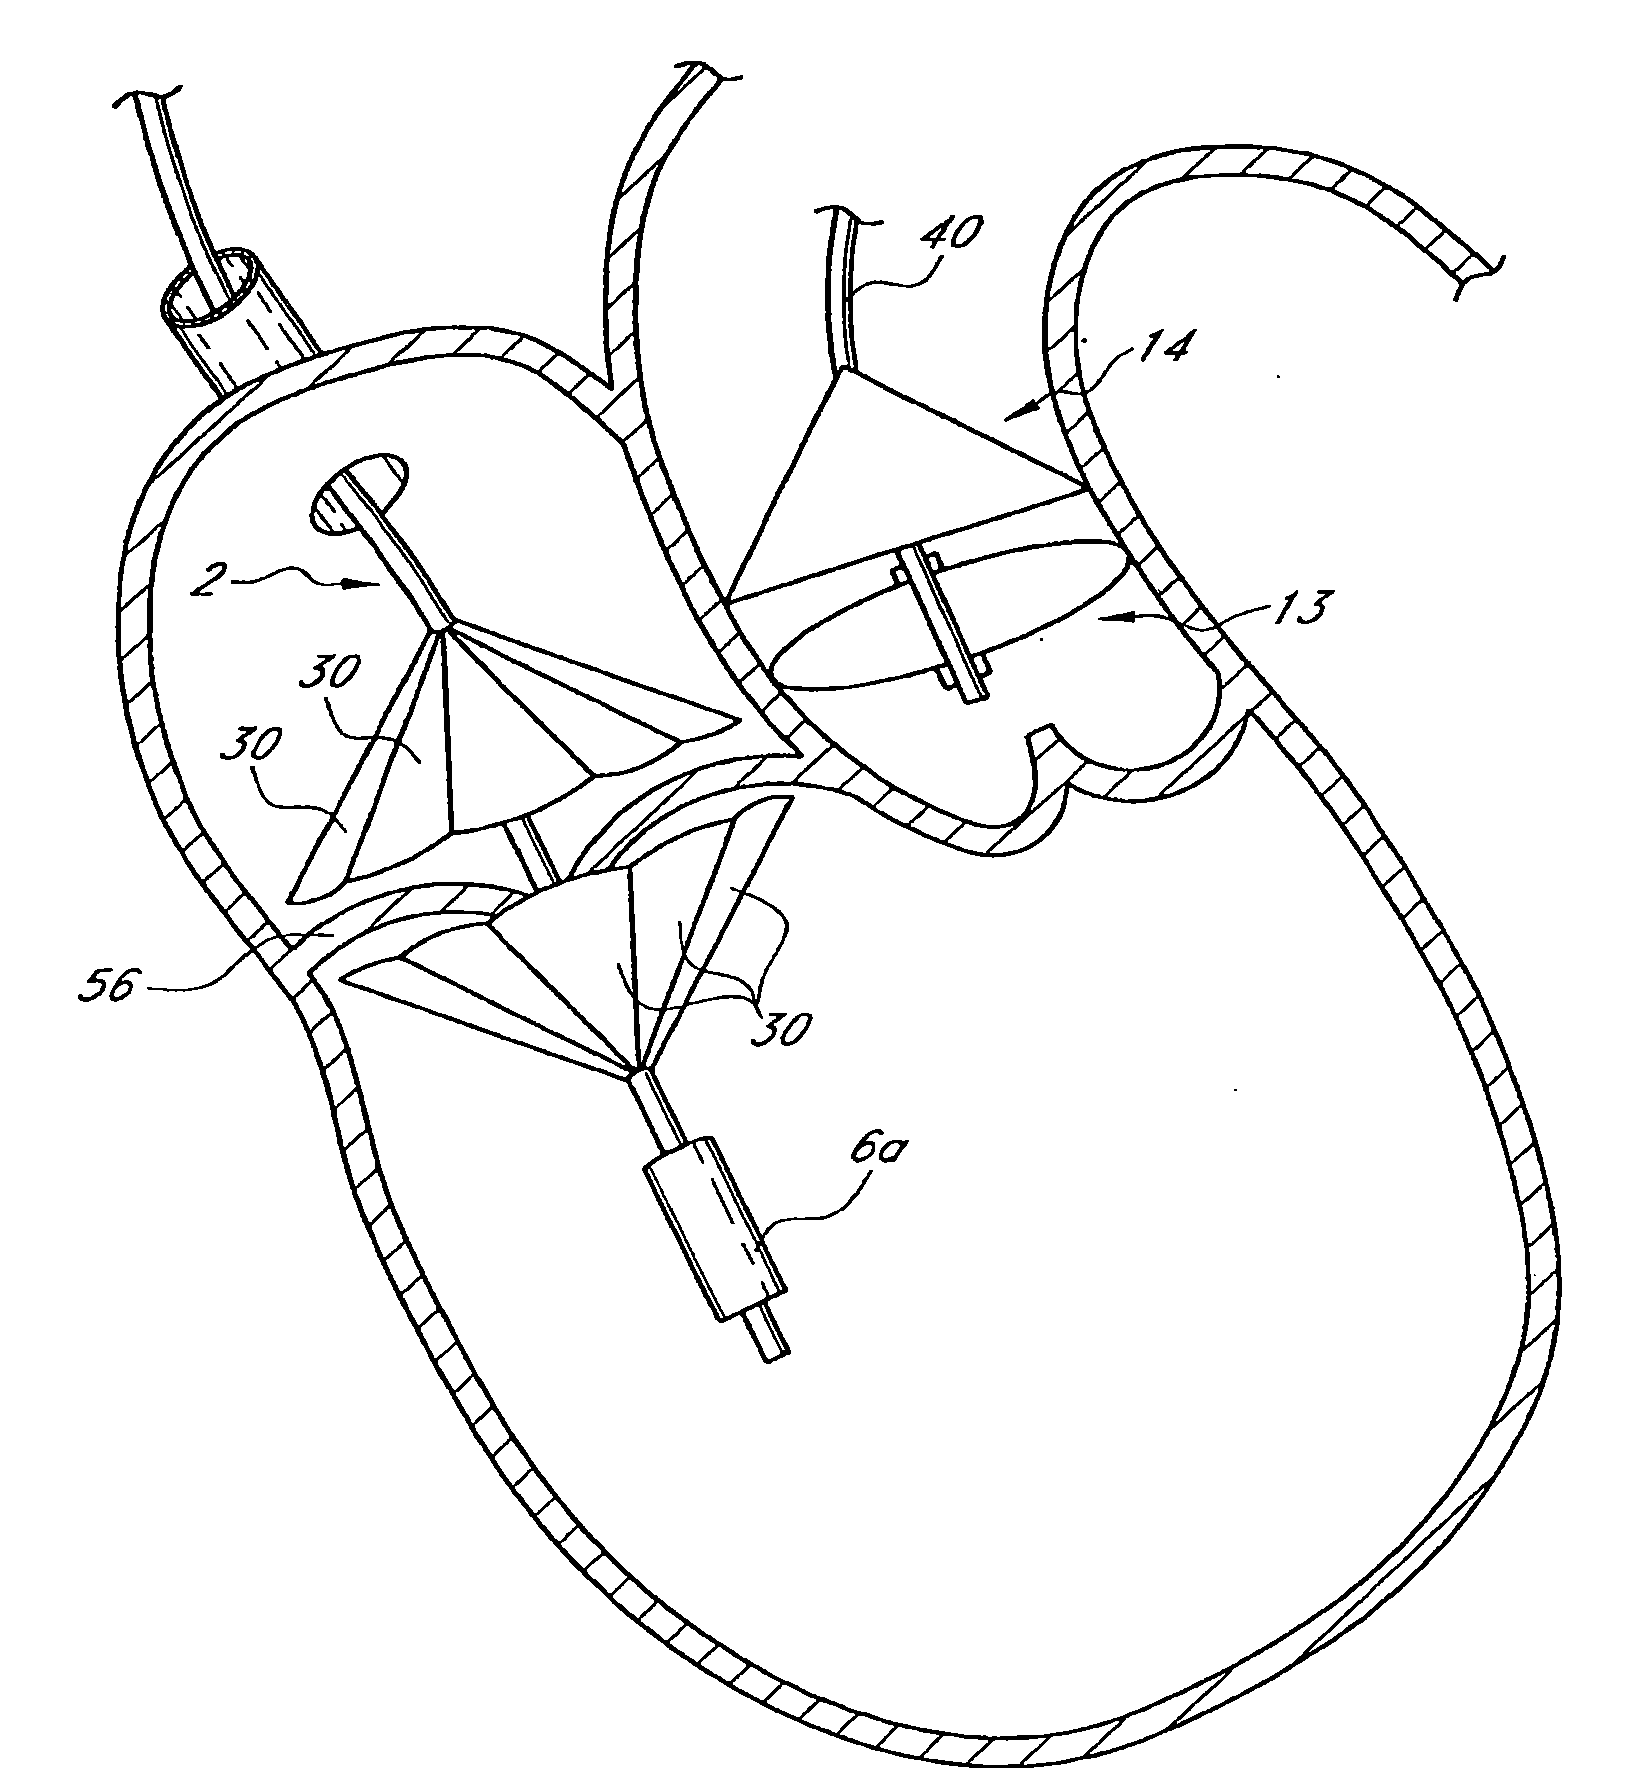 Prosthetic Valve for Transluminal Delivery